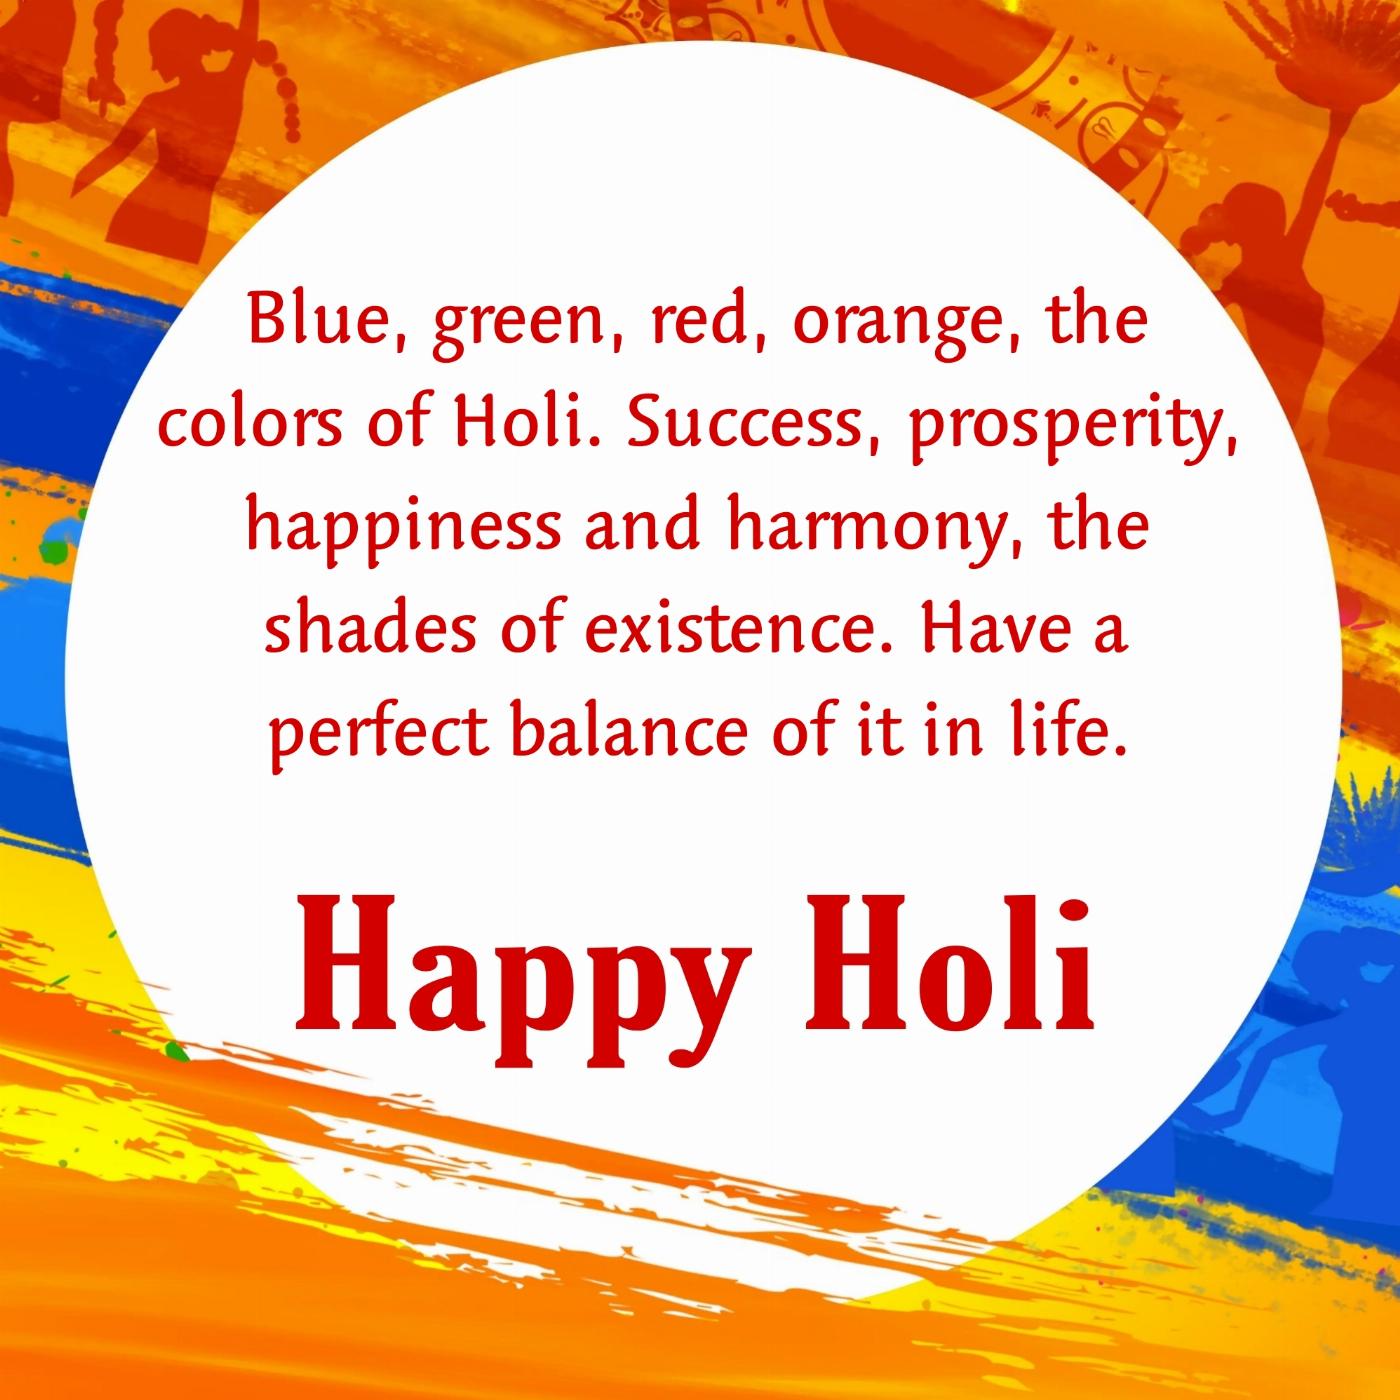 Blue green red orange the colors of Holi